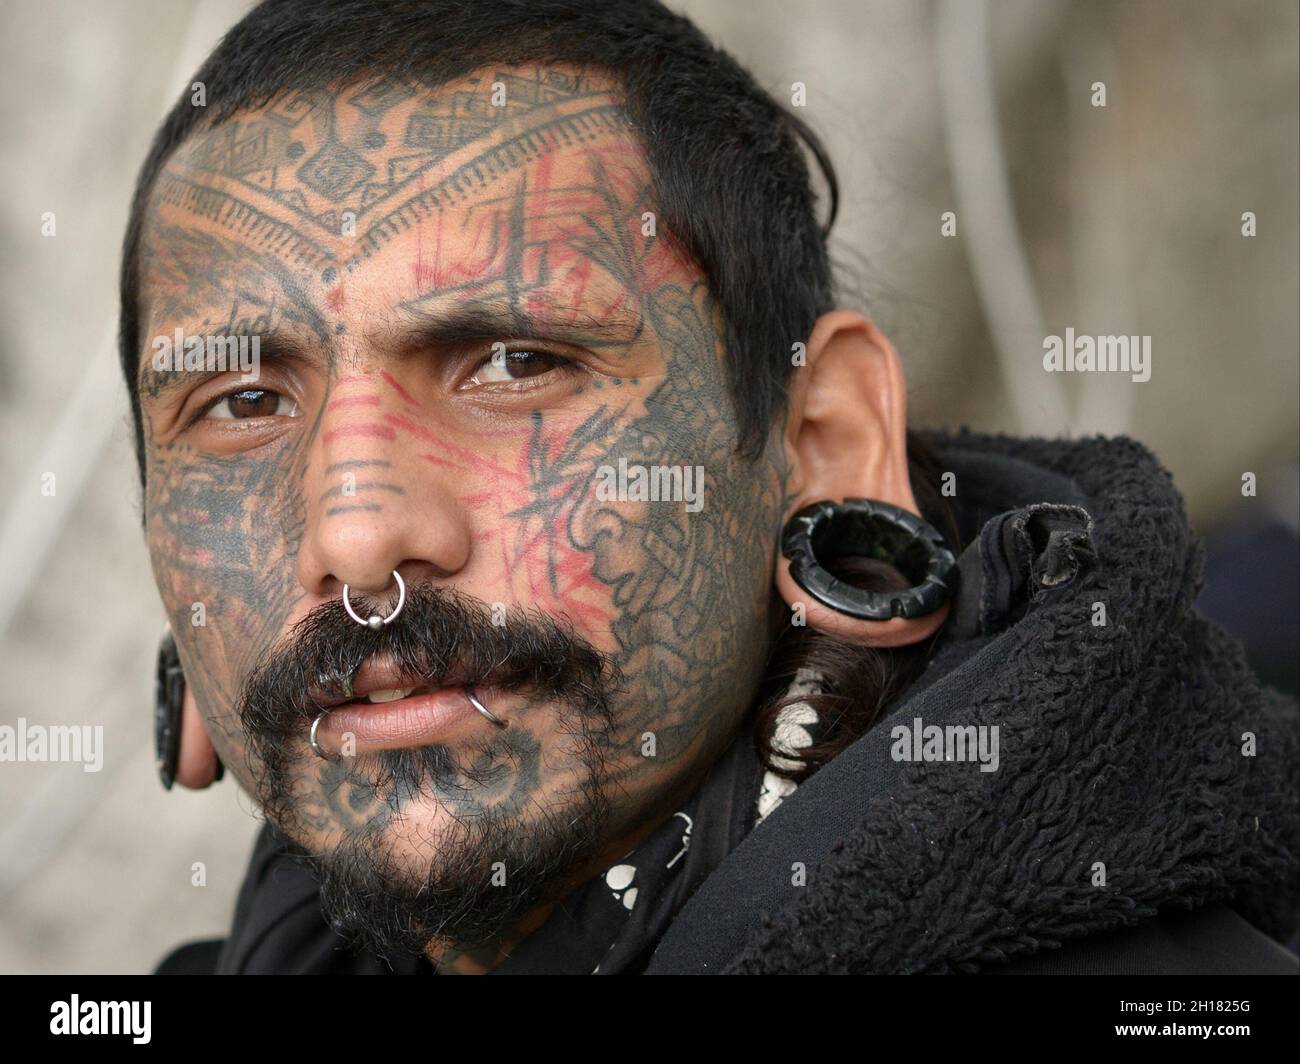 Young Mexican man with Mayan folk-art facial tattoos, lip piercings, septum piercing and gauged ear lobes with large ear plugs looks at the viewer. Stock Photo